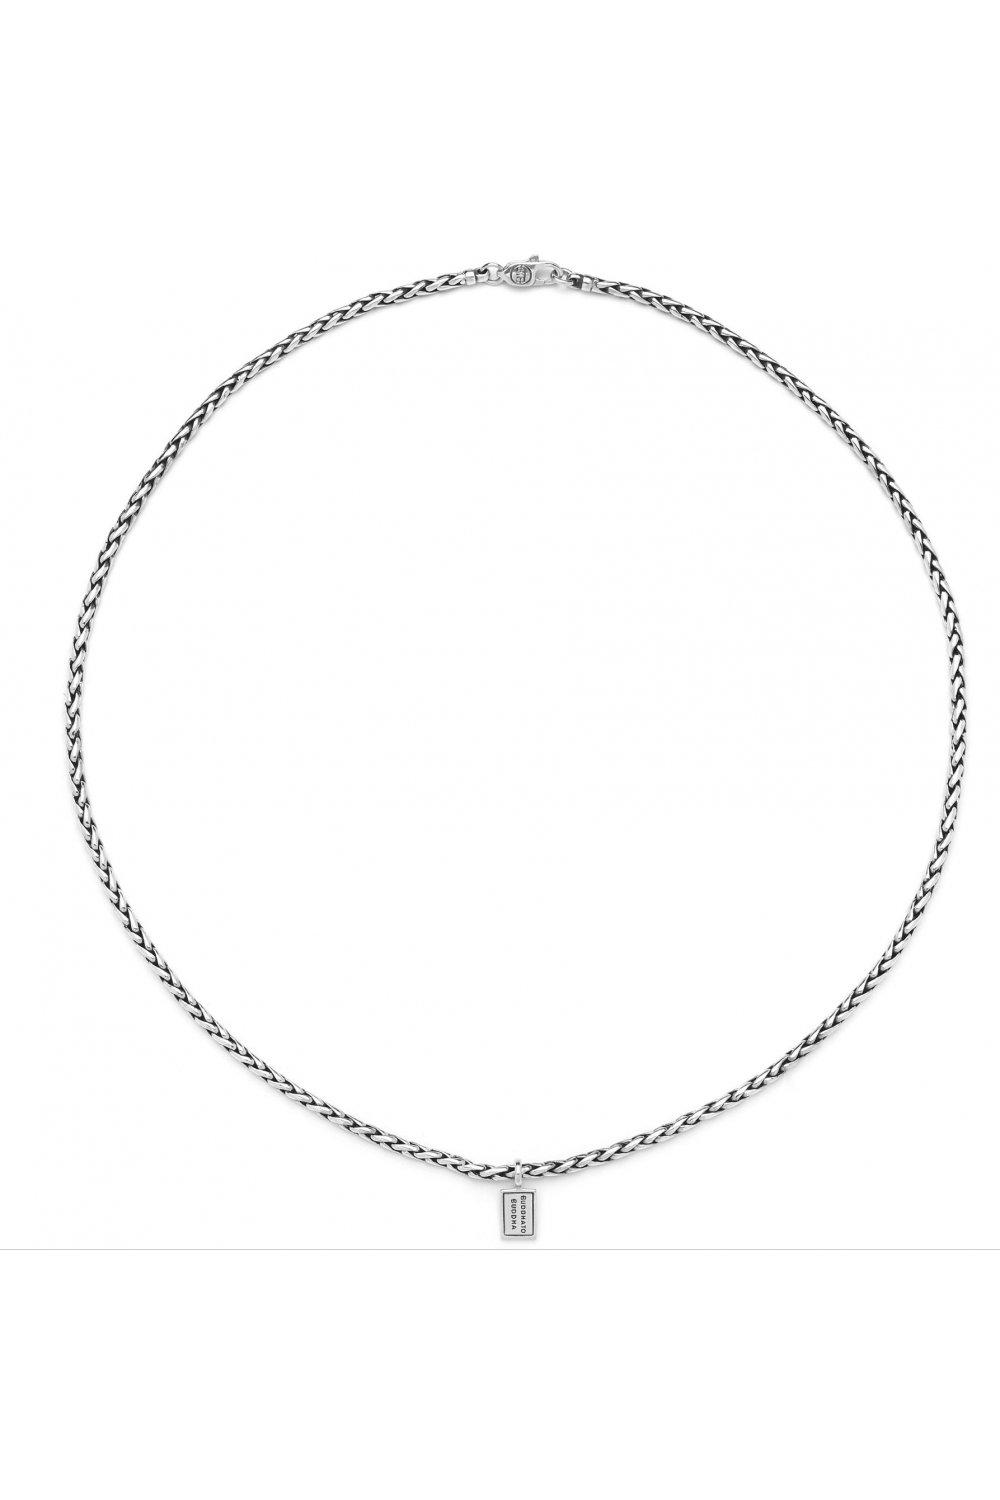 george sterling silver fashion necklace - 001j047160100